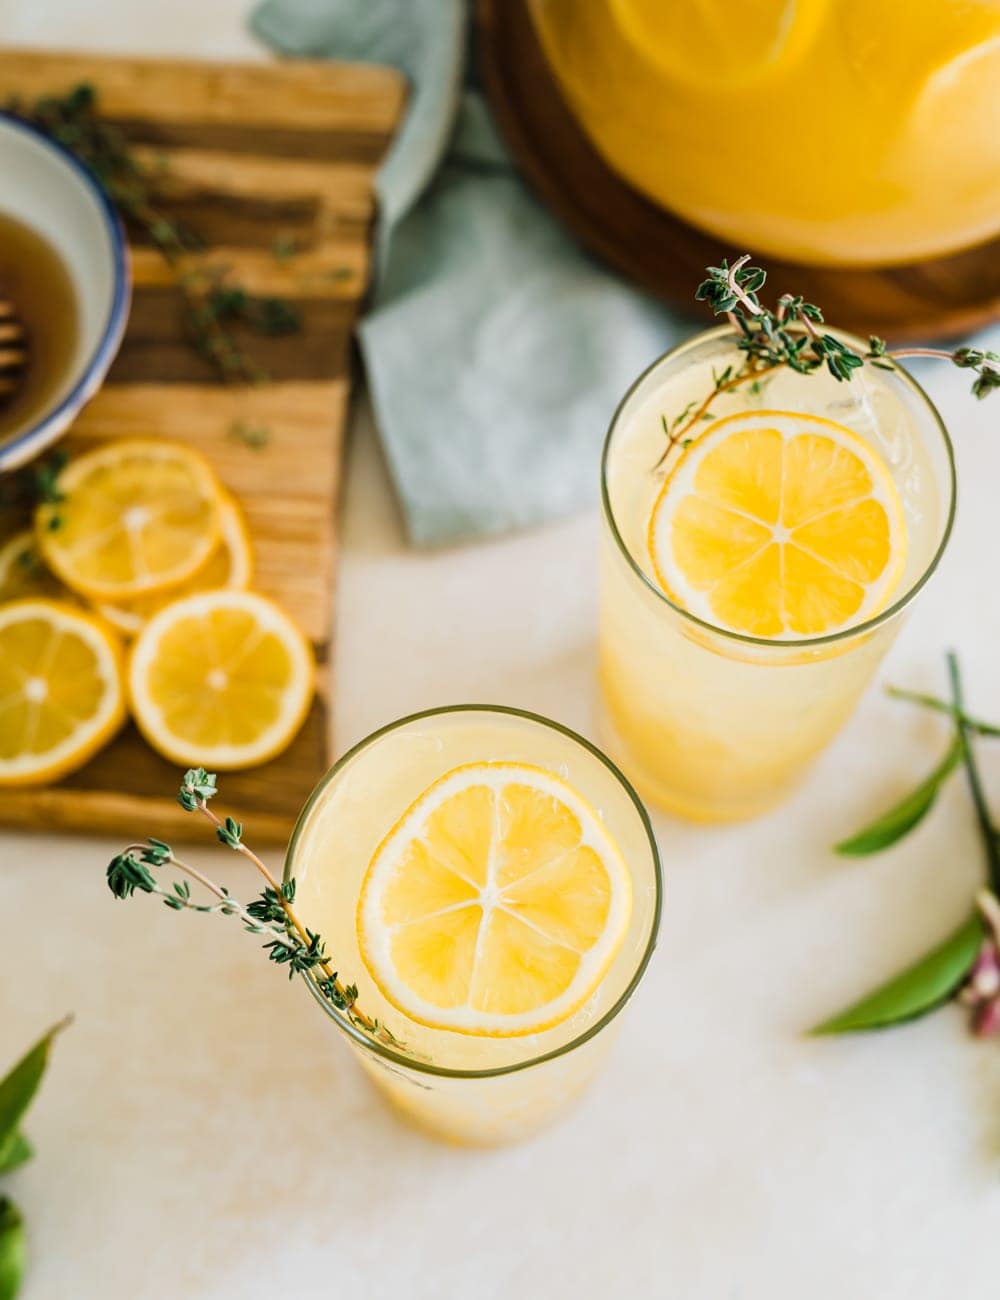 two tall collins glasses filled with lemonade, lemon slices and fresh thyme in glasses, pitcher or lemonade, fresh whole lemons, blue bowl with lemons, cutting board with lemon slices